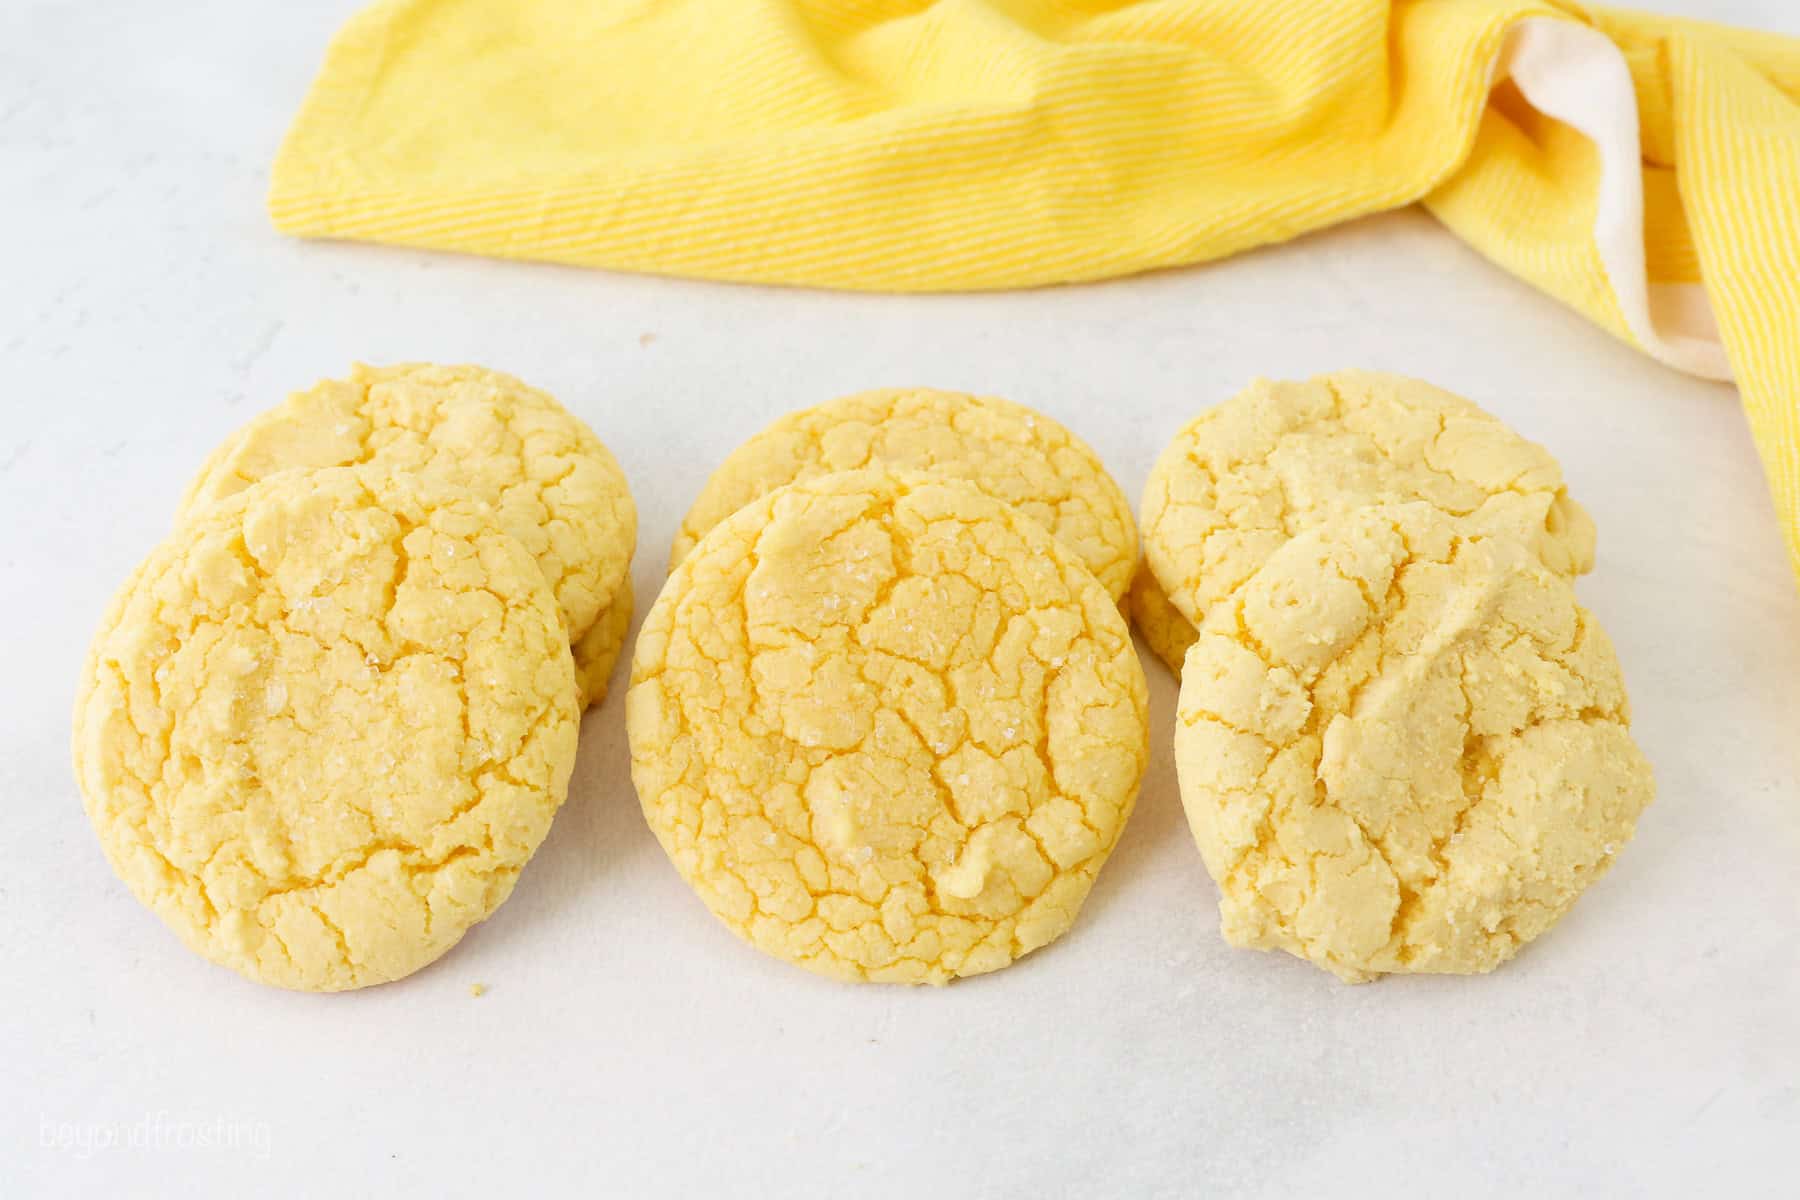 Lemon cake mix cookies shown side by side, demonstrating the differences in baking times on the texture of the cookies.